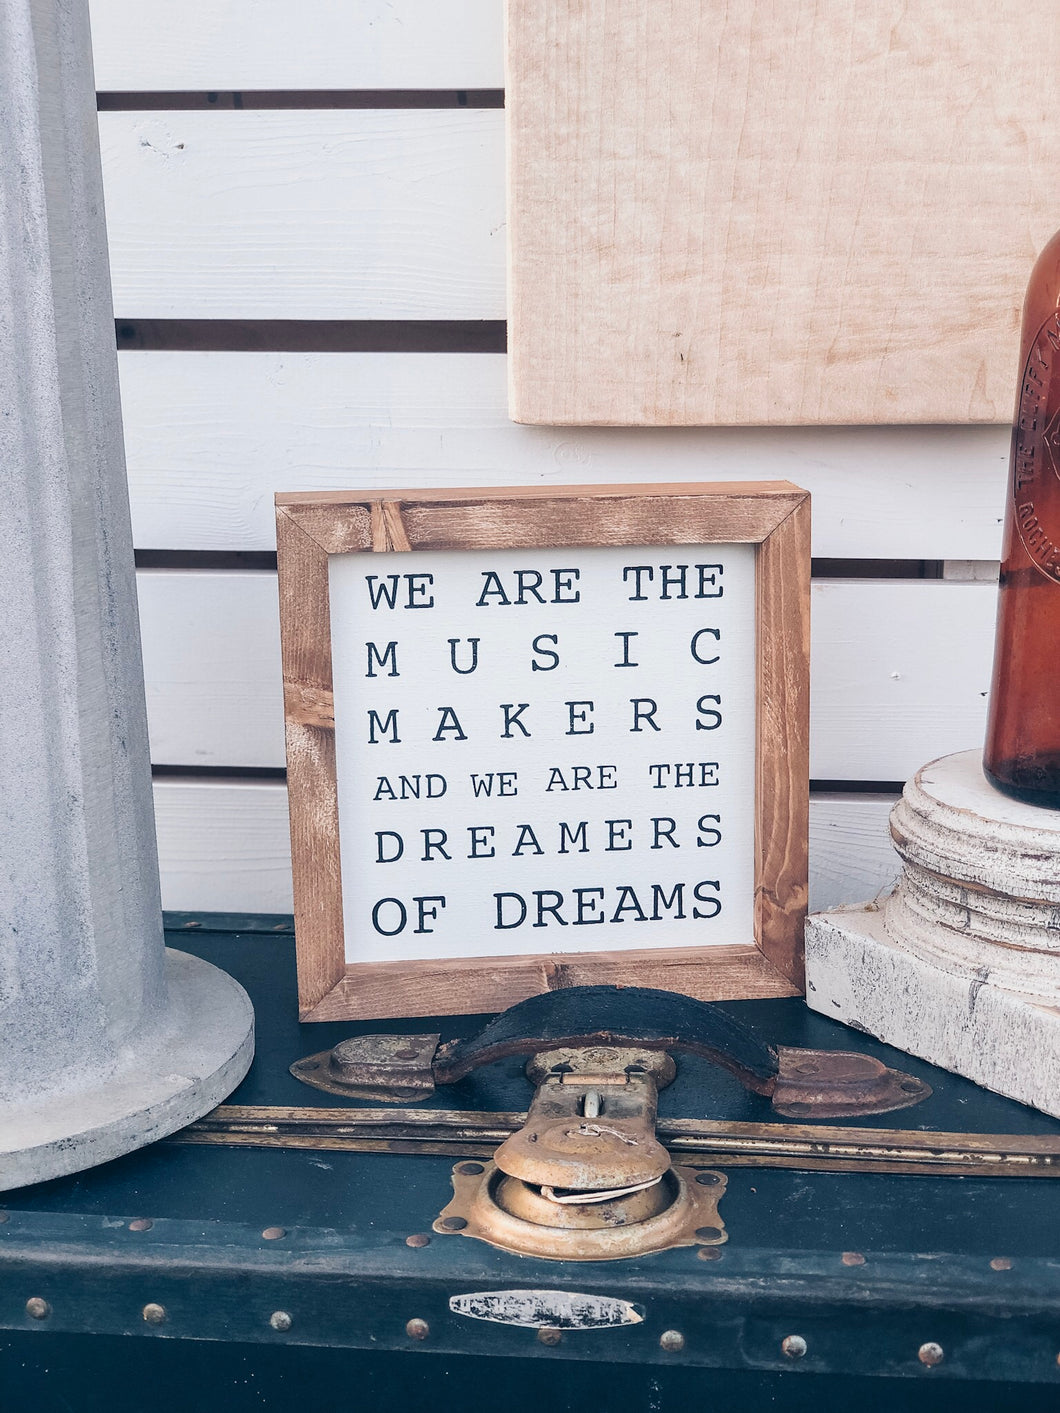 WE ARE THE MUSIC MAKERS AND WE ARE THE DREAMERS OF DREAMS